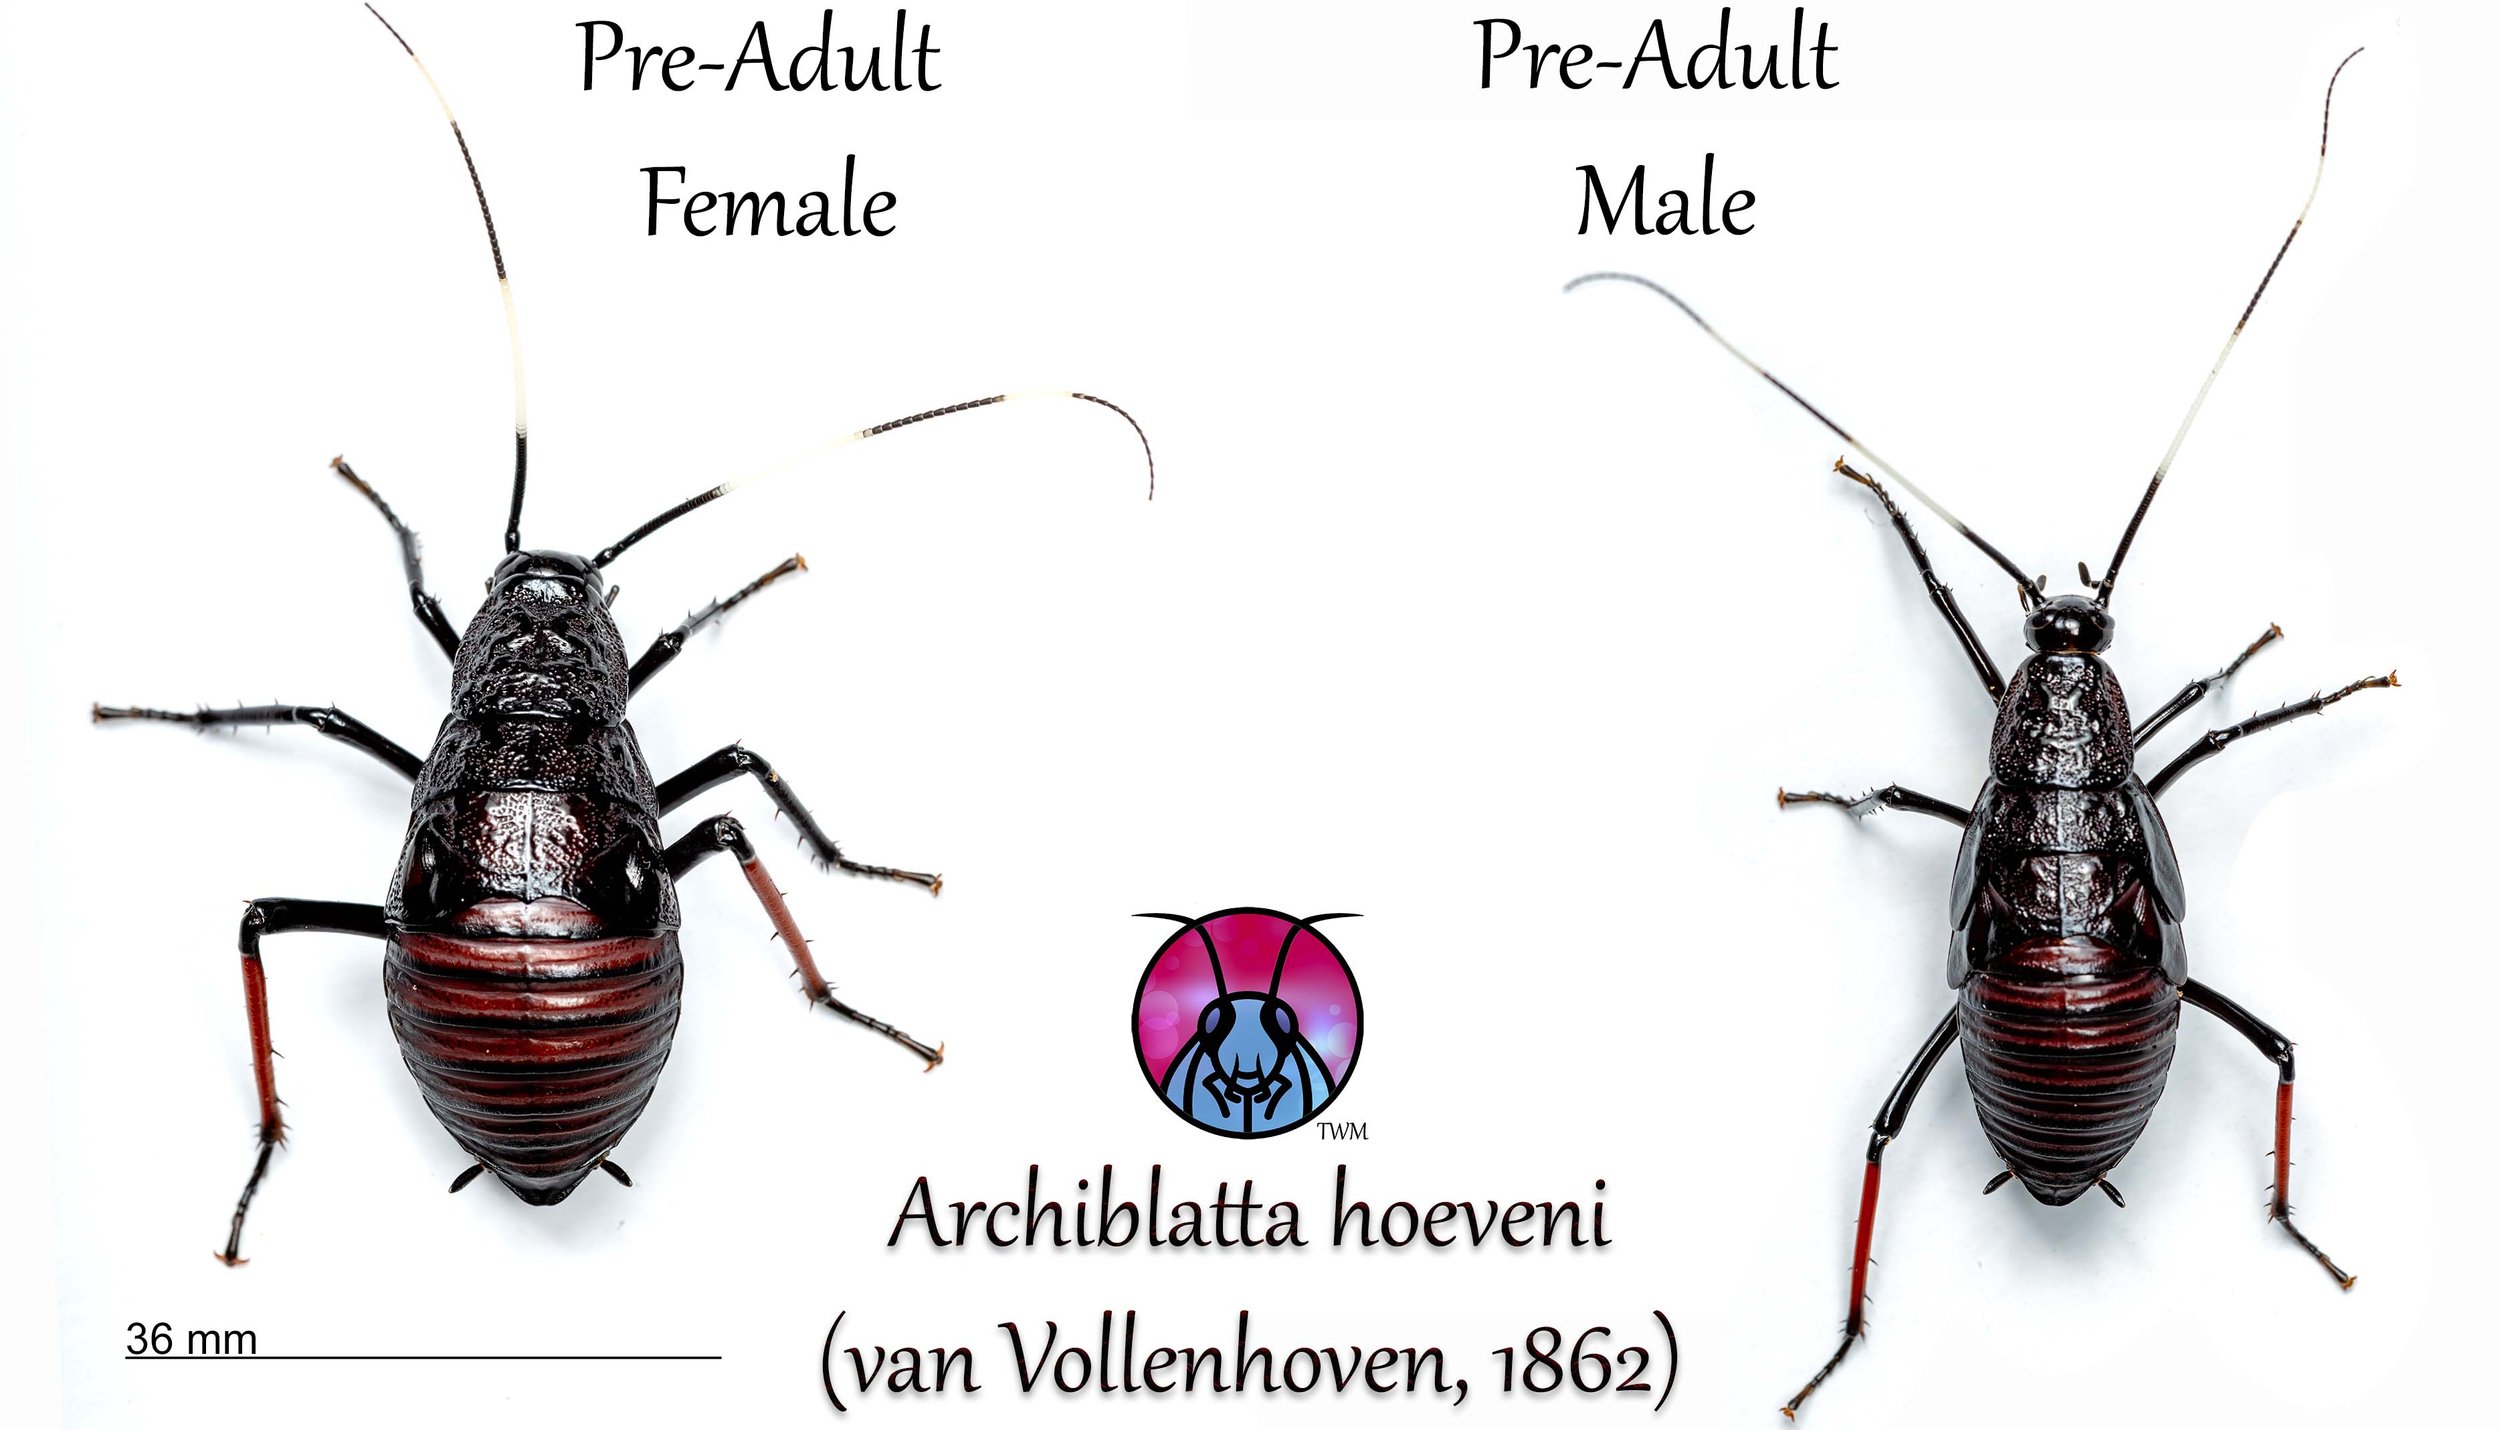 The female is nymph female not pre-adult female